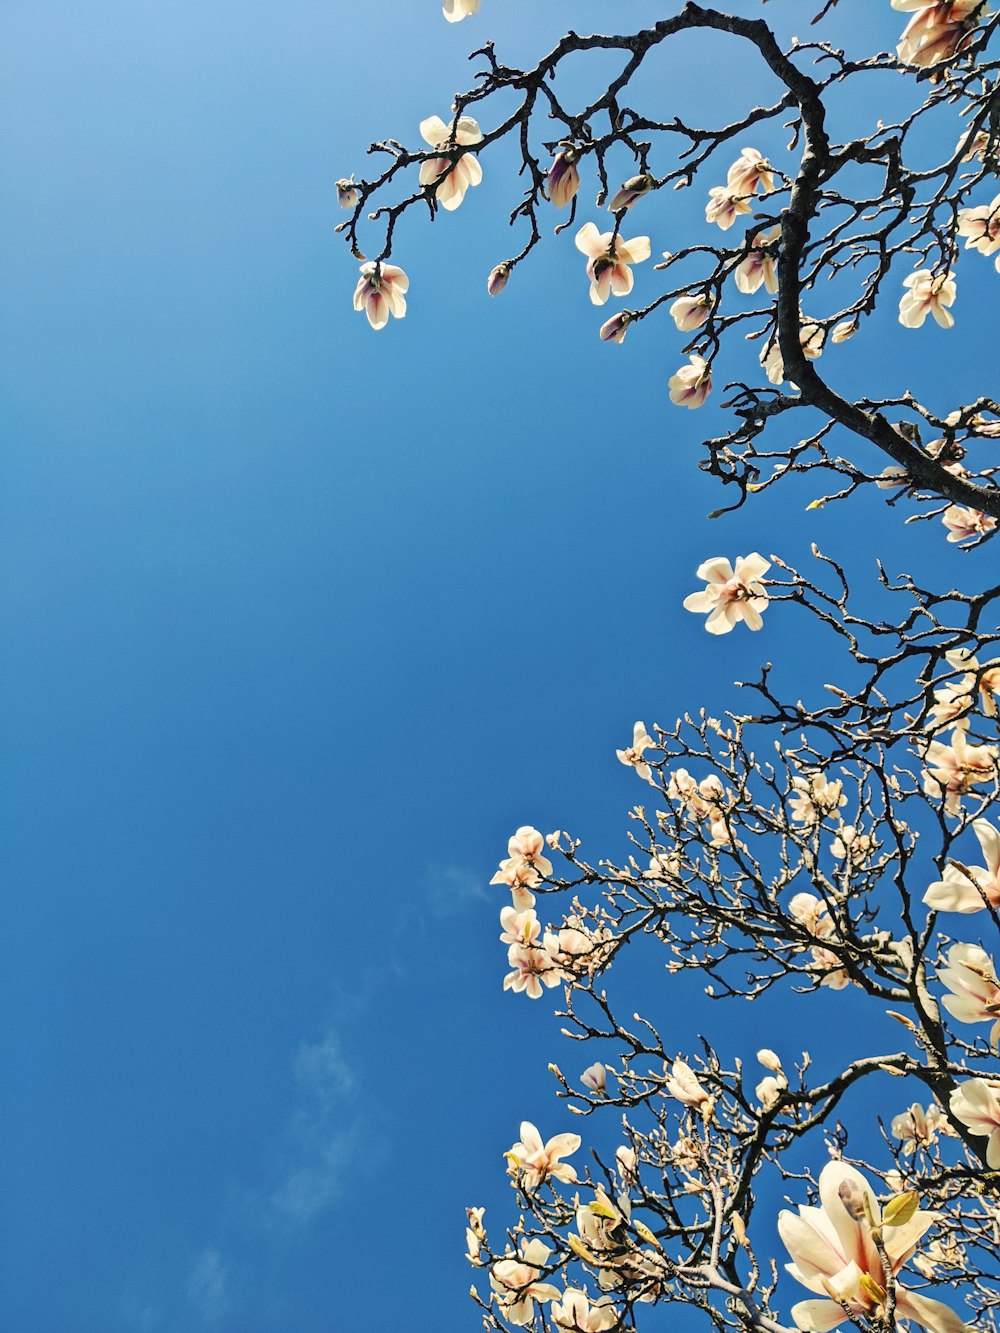 white flowers on tree branch under blue sky during daytime